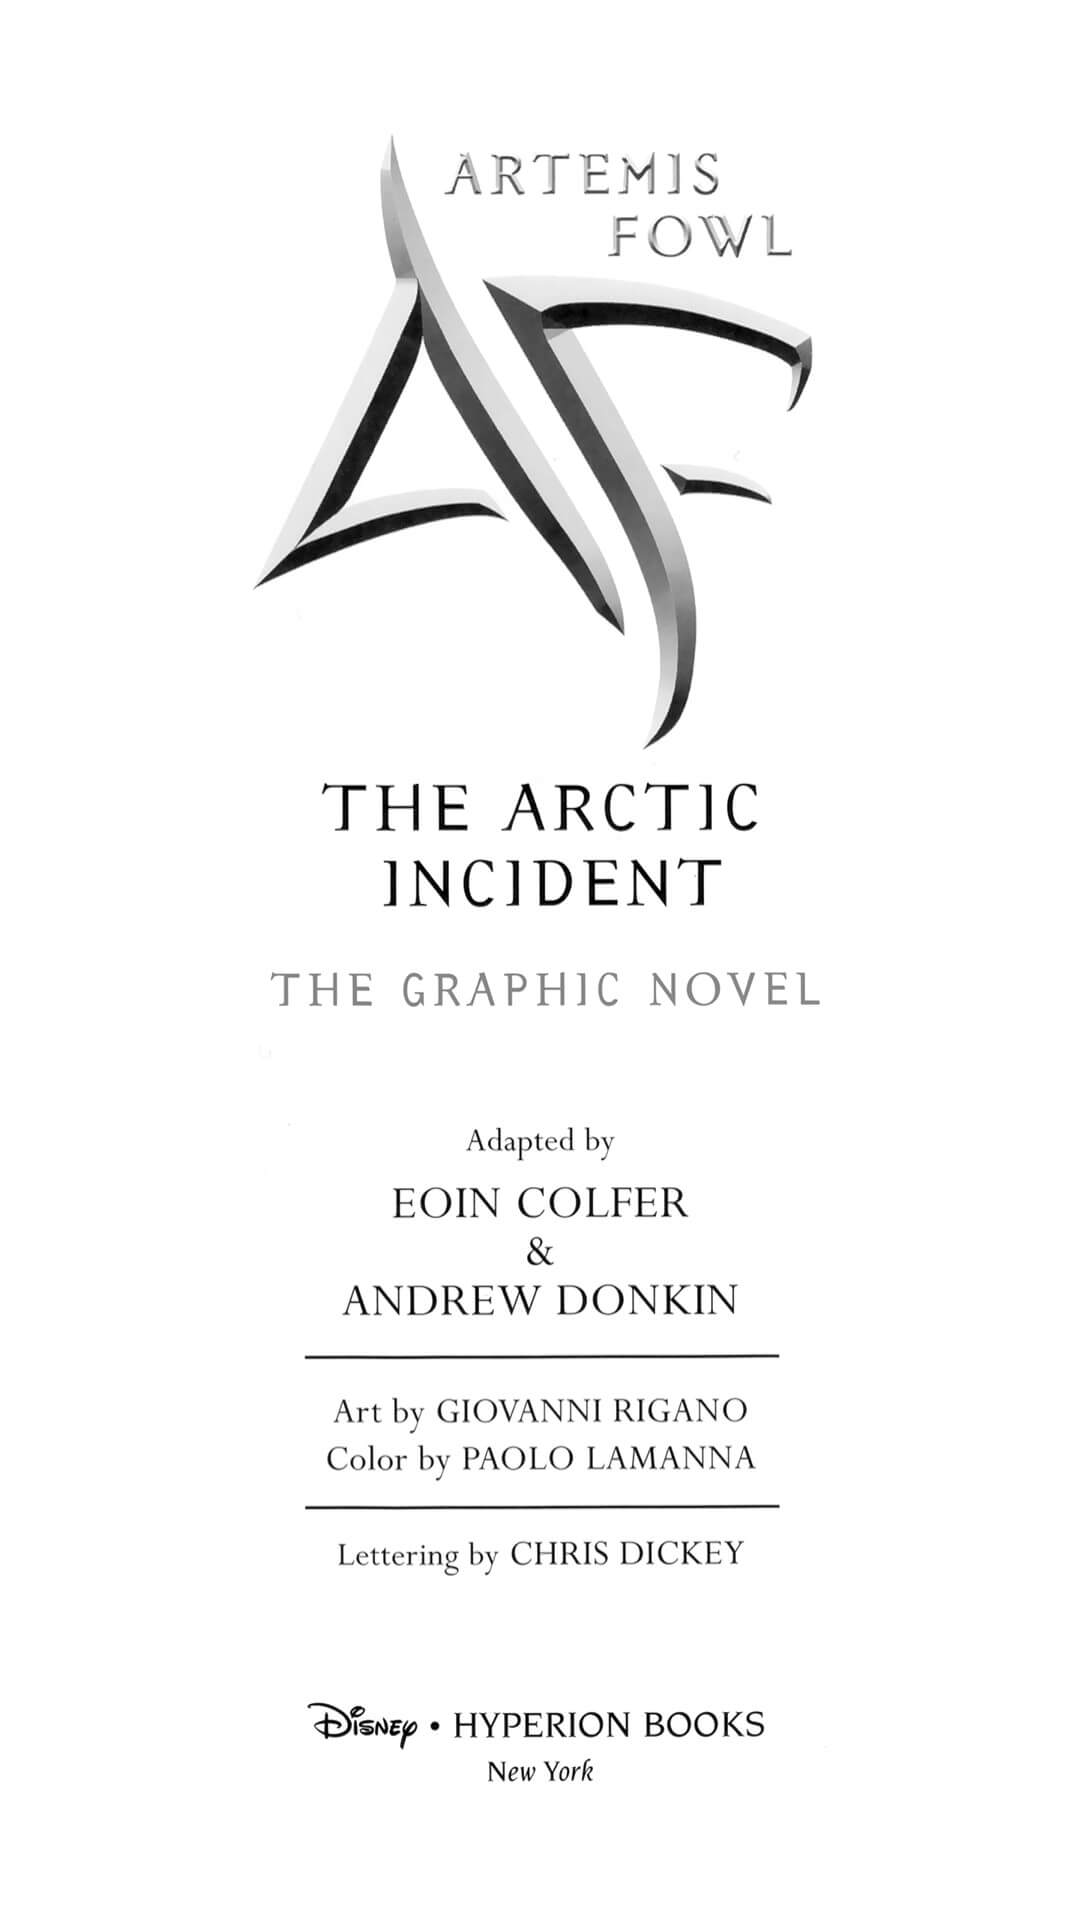 page i of artemis fowl the arctic incident graphic novel